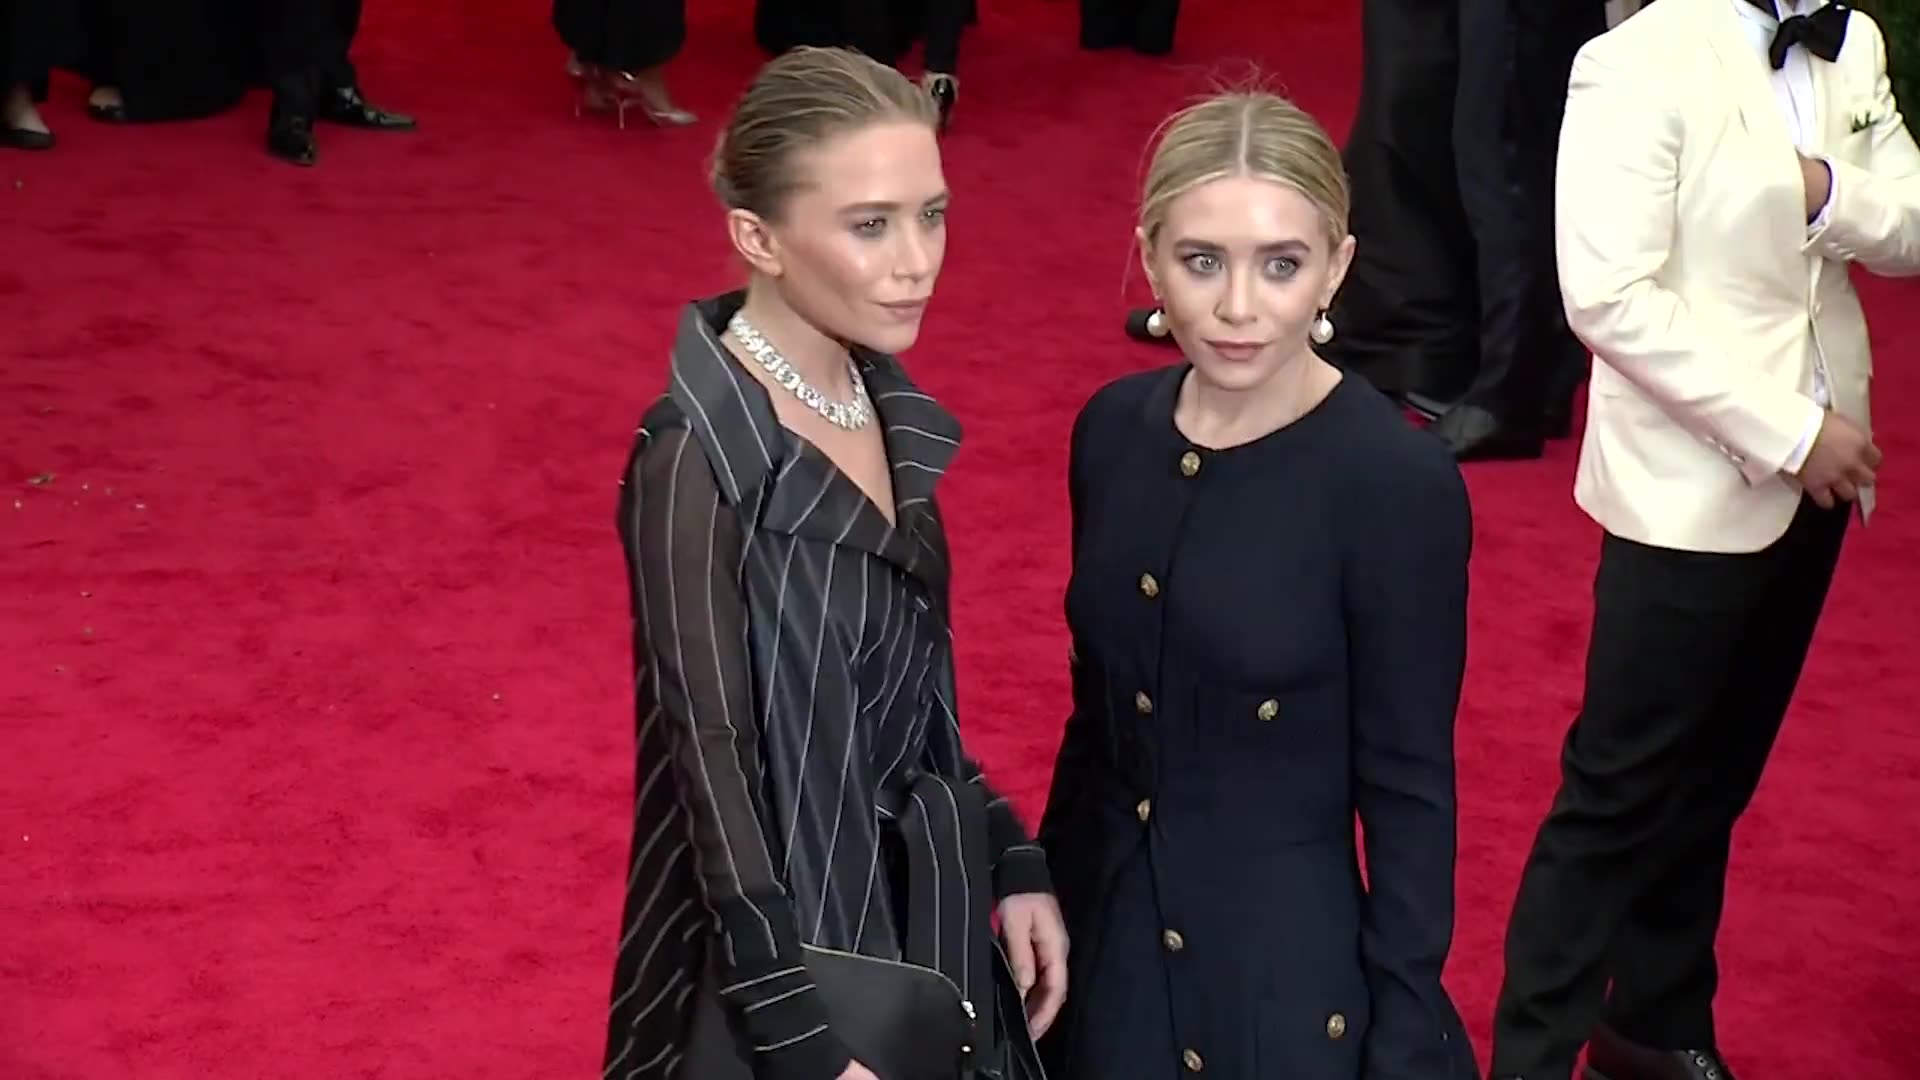 Mary-Kate and Ashley Olsen gave heartfelt speech to make amends with 'Full House' cast after Bob Saget's death